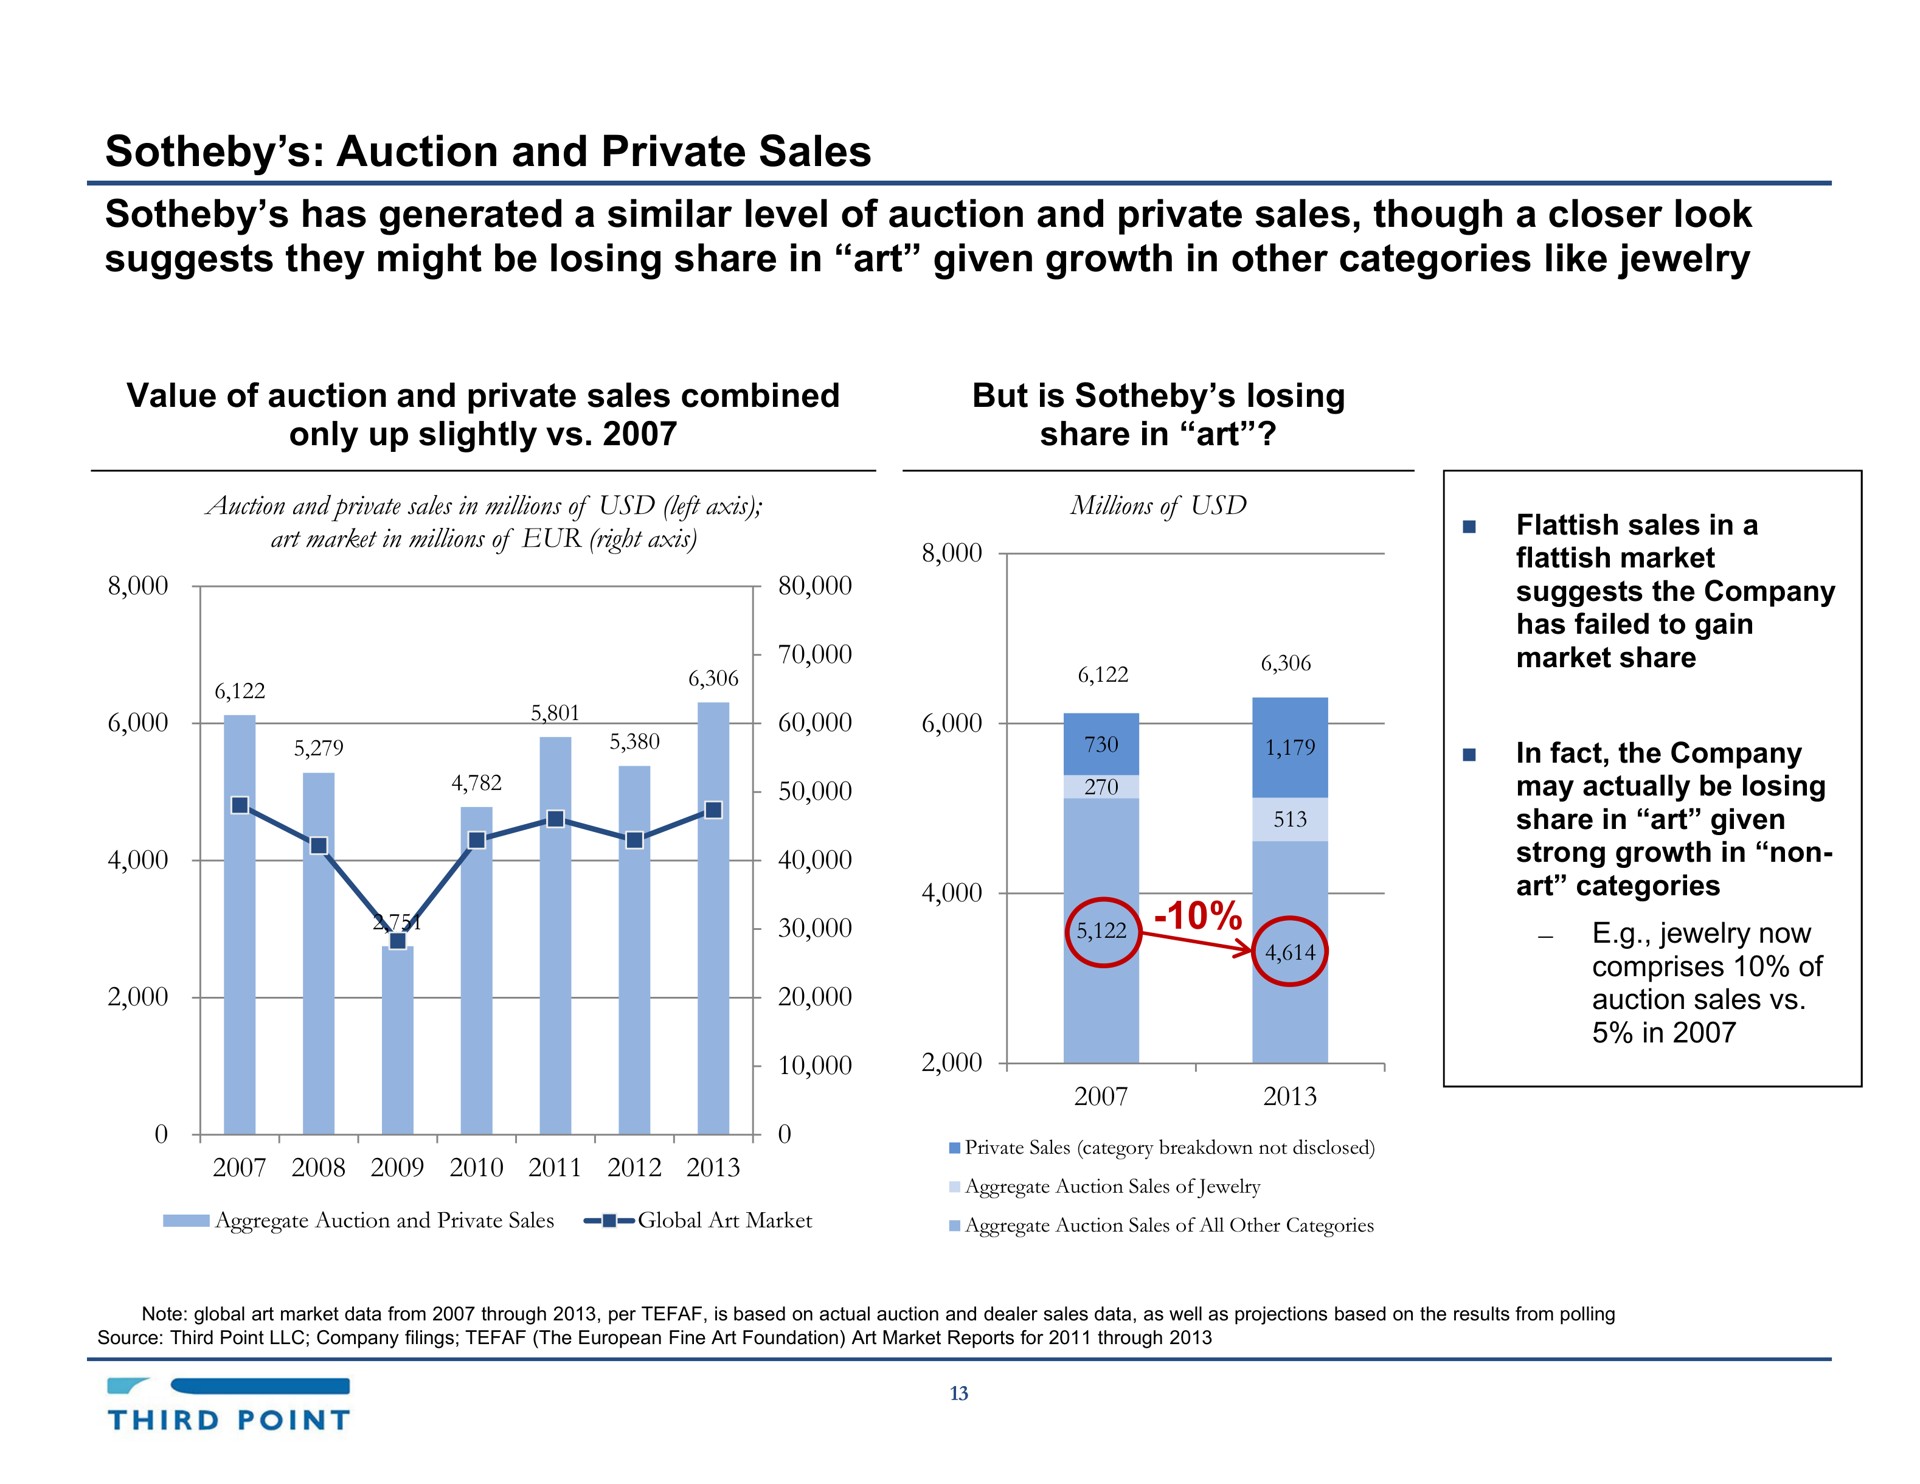 auction and private sales has generated a similar level of auction and private sales though a closer look suggests they might be losing share in art given growth in other categories like jewelry | Third Point Management